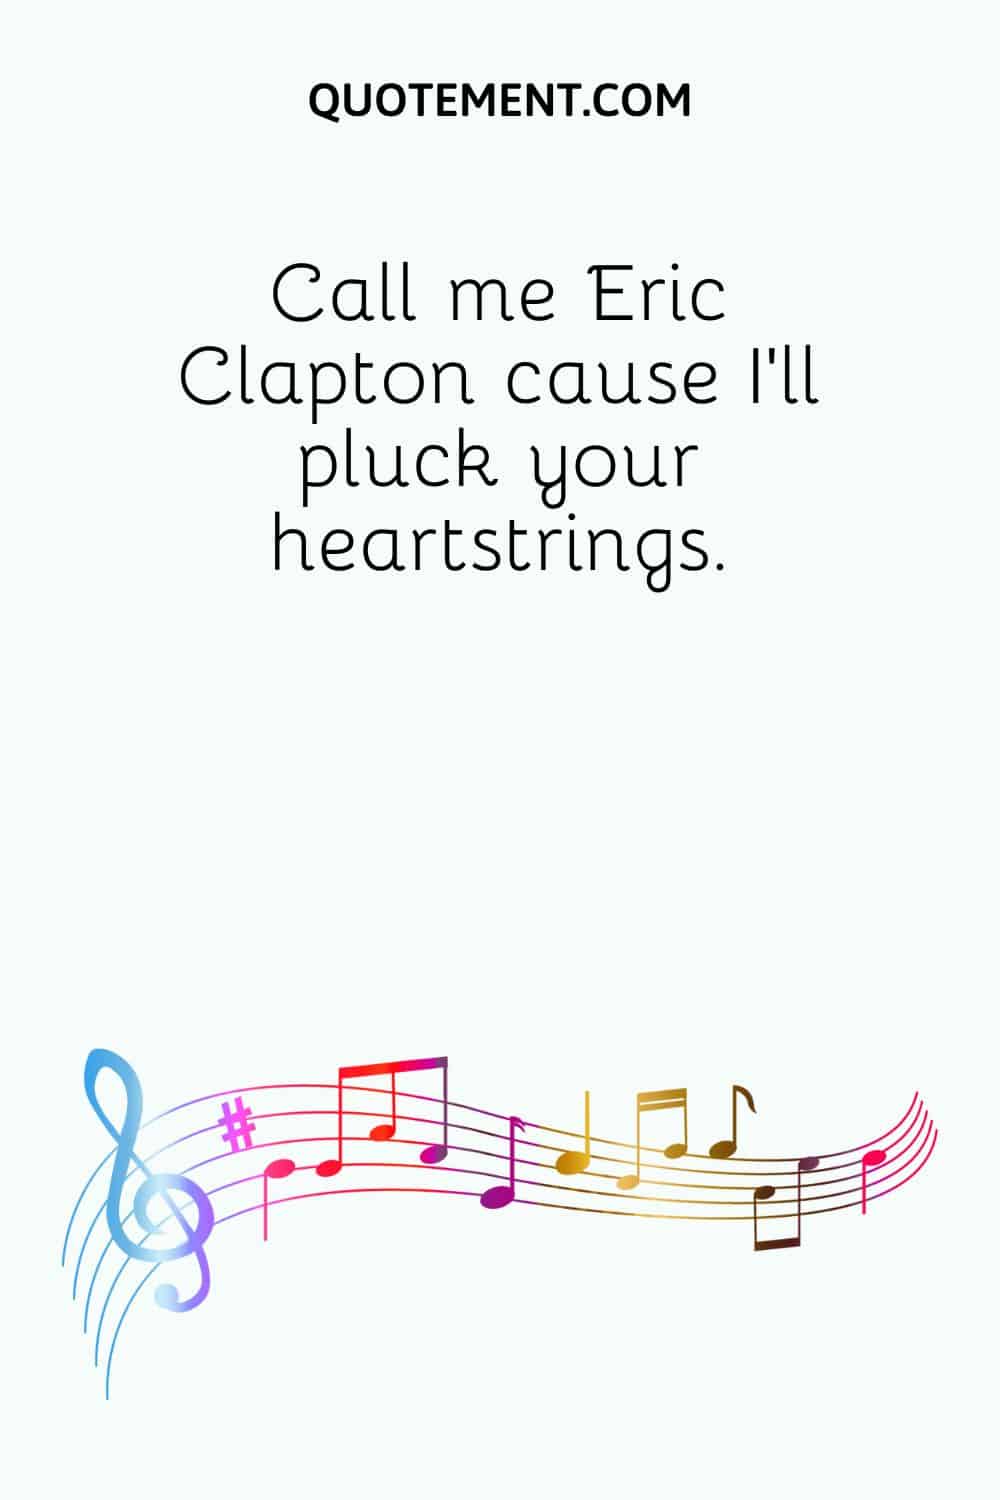 Call me Eric Clapton cause I’ll pluck your heartstrings